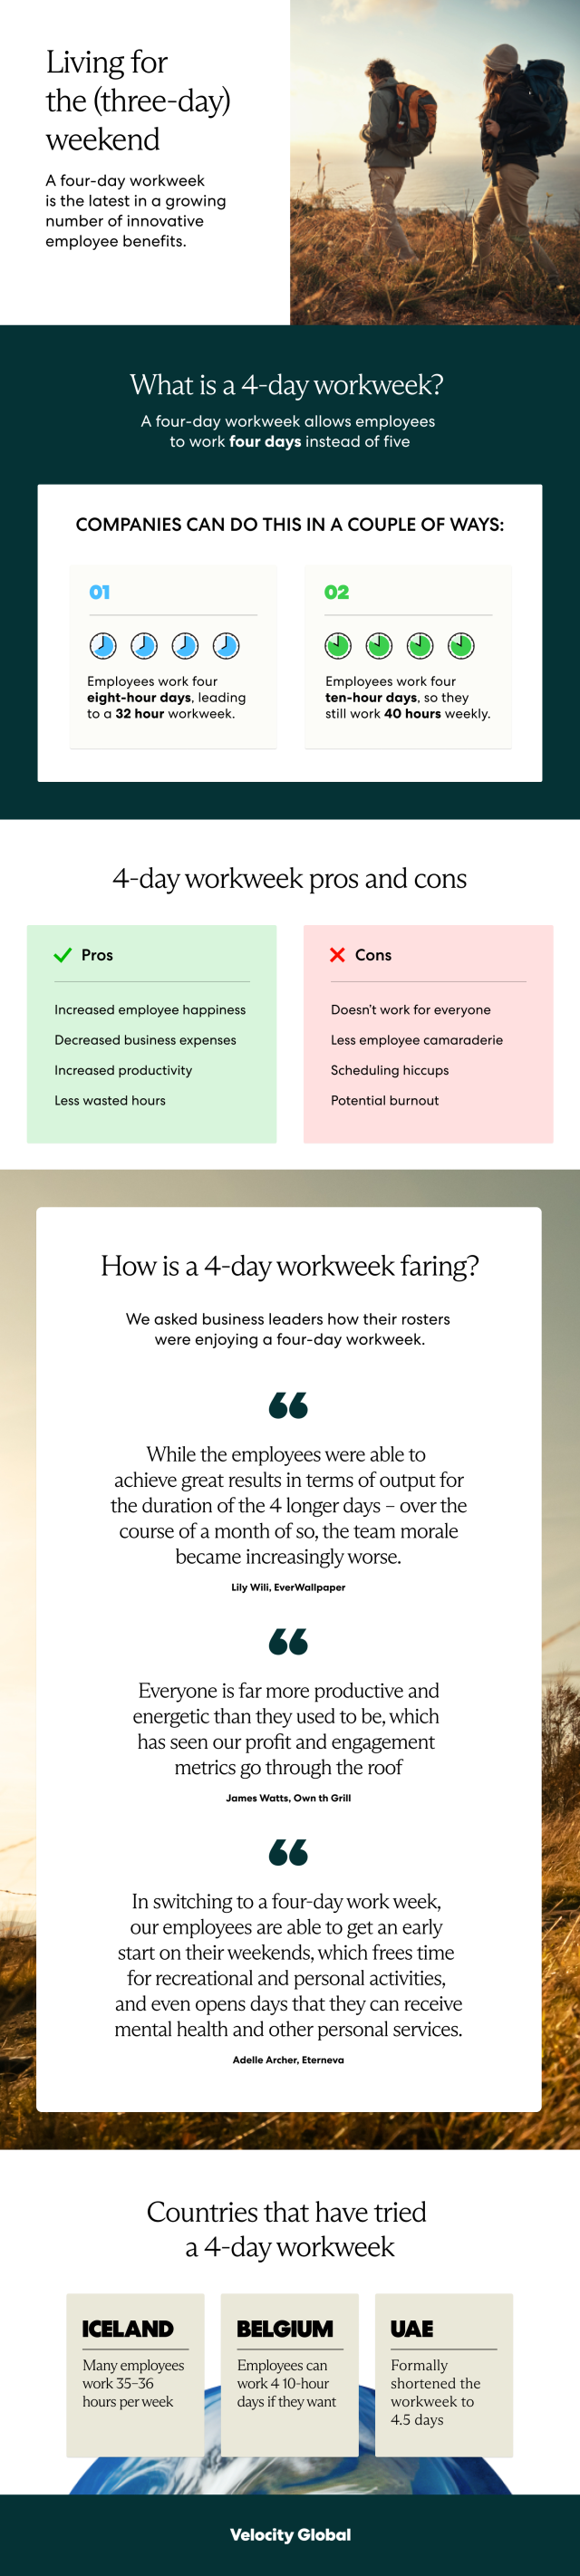 A four-day workweek is the latest in a growing number of innovative employee benefits. 